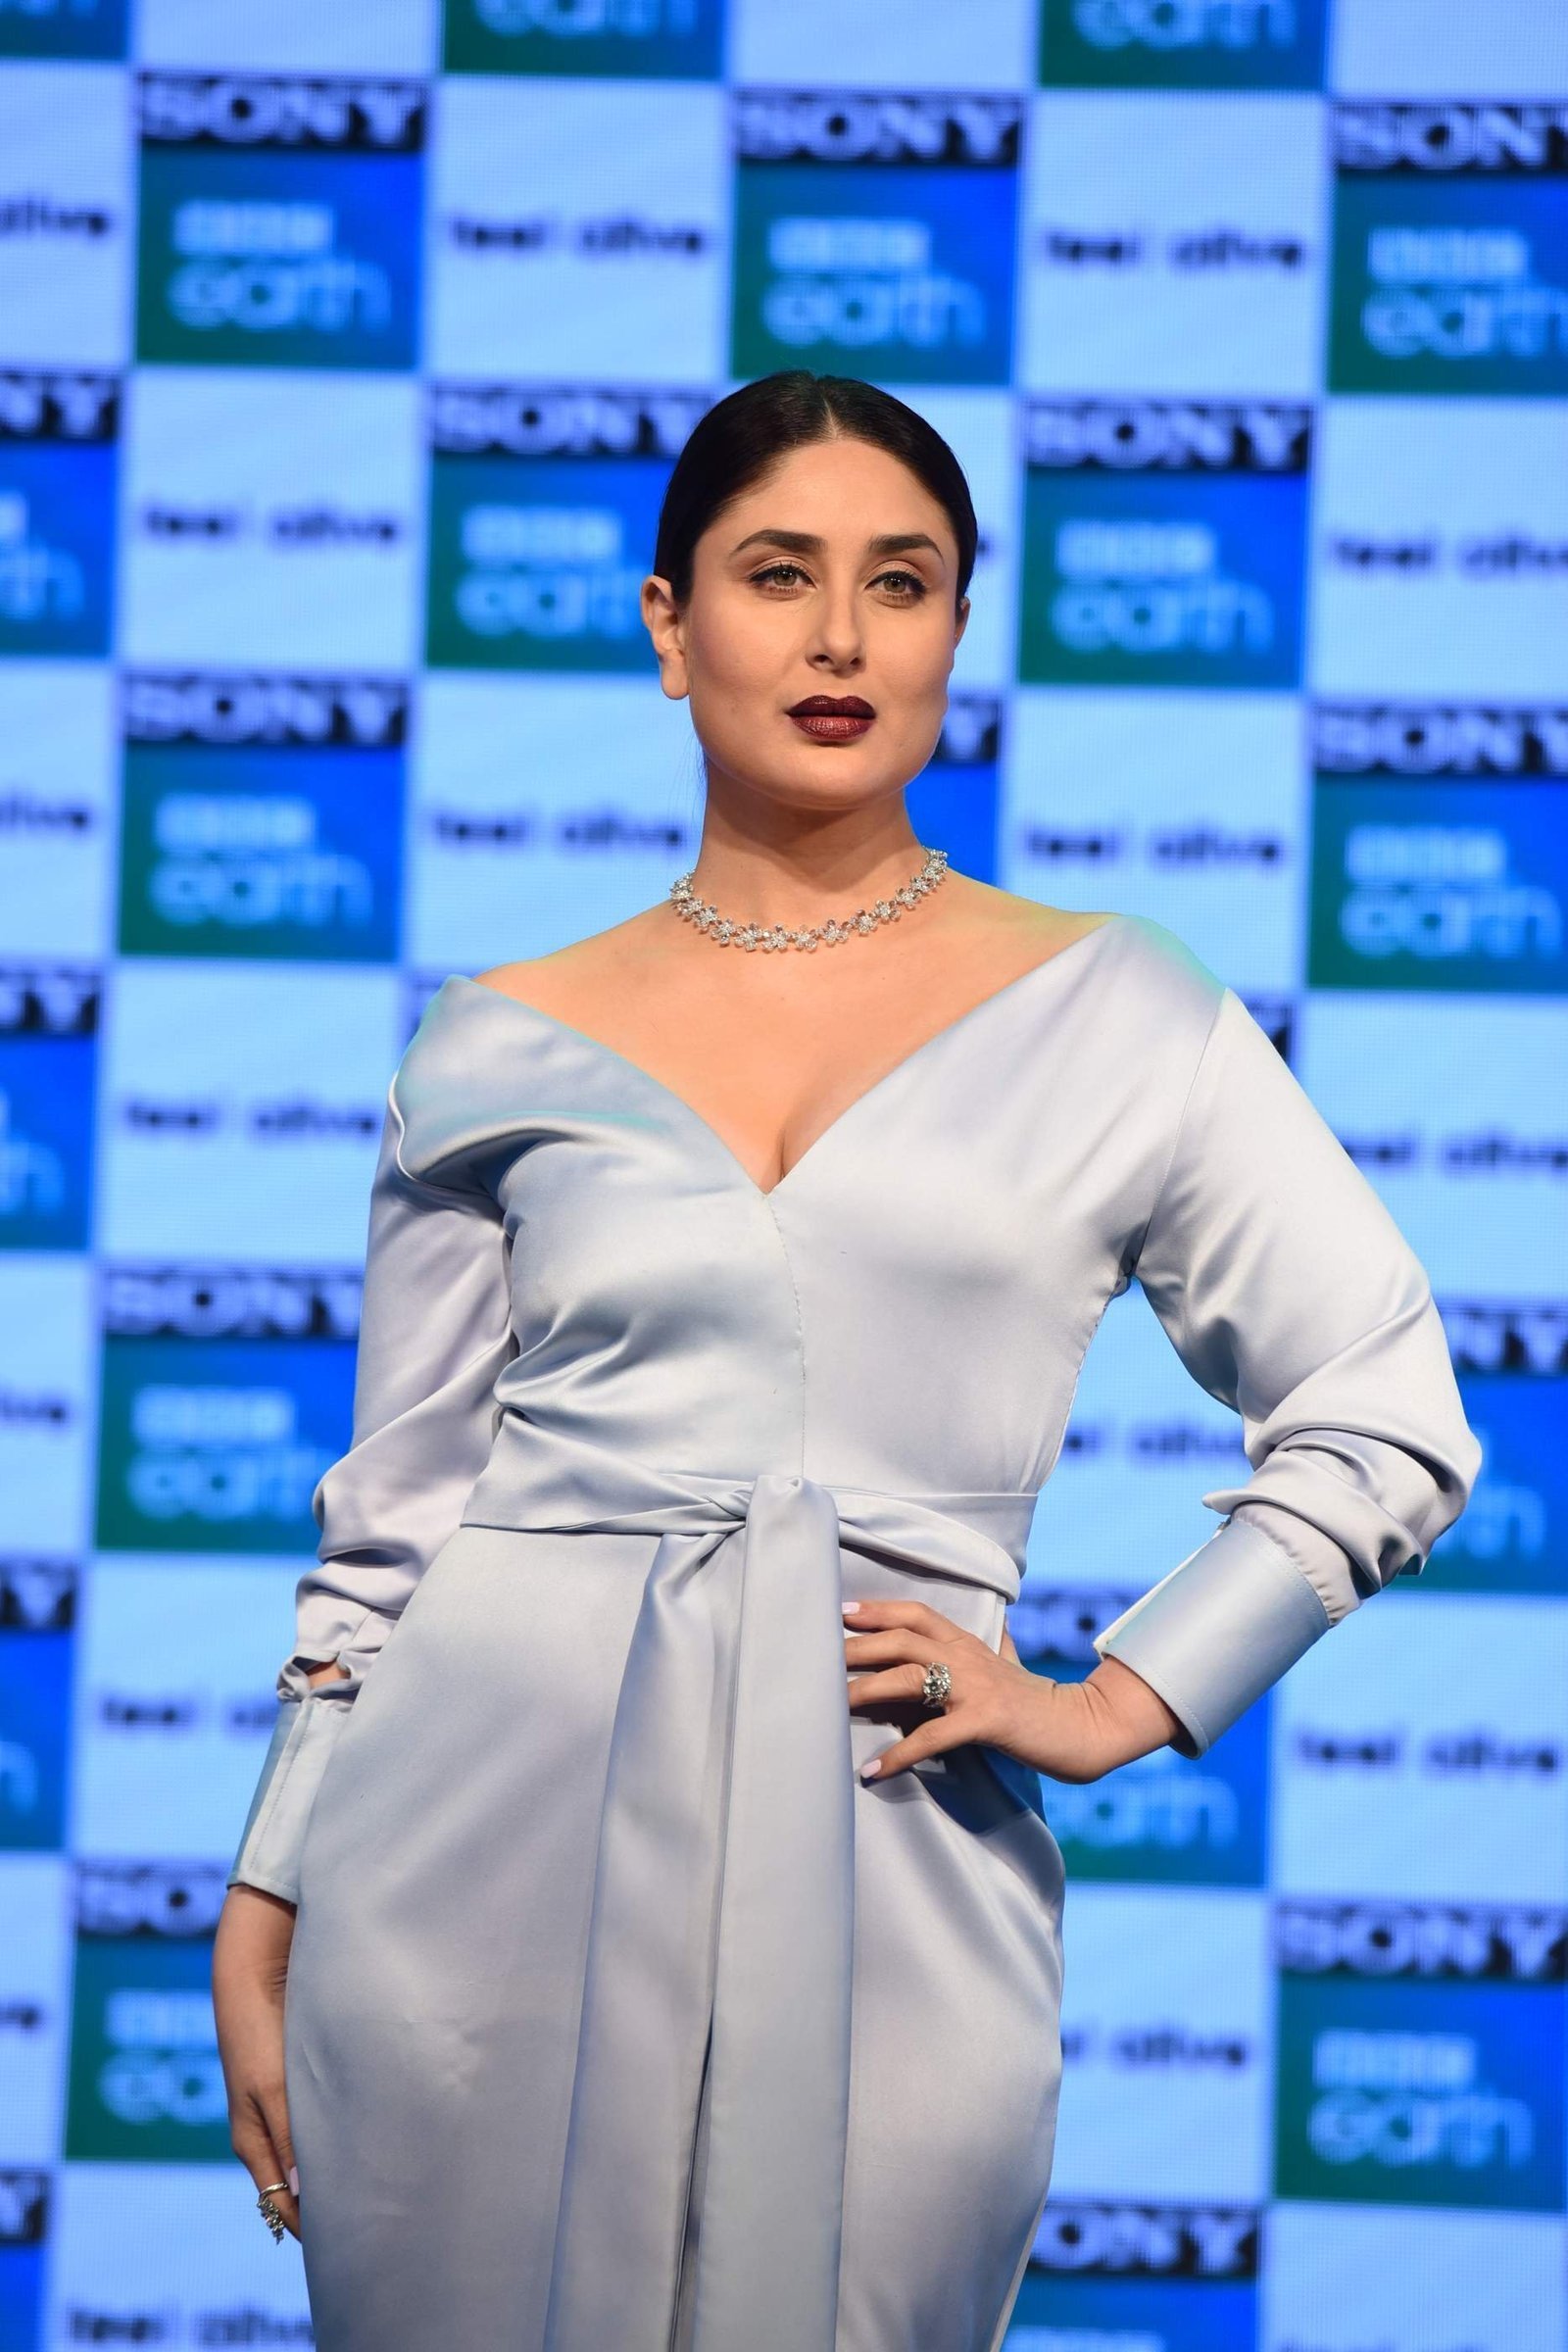 Kareena Kapoor Khan during the launch of a new channel Sony BBC Earth Images | Picture 1477737